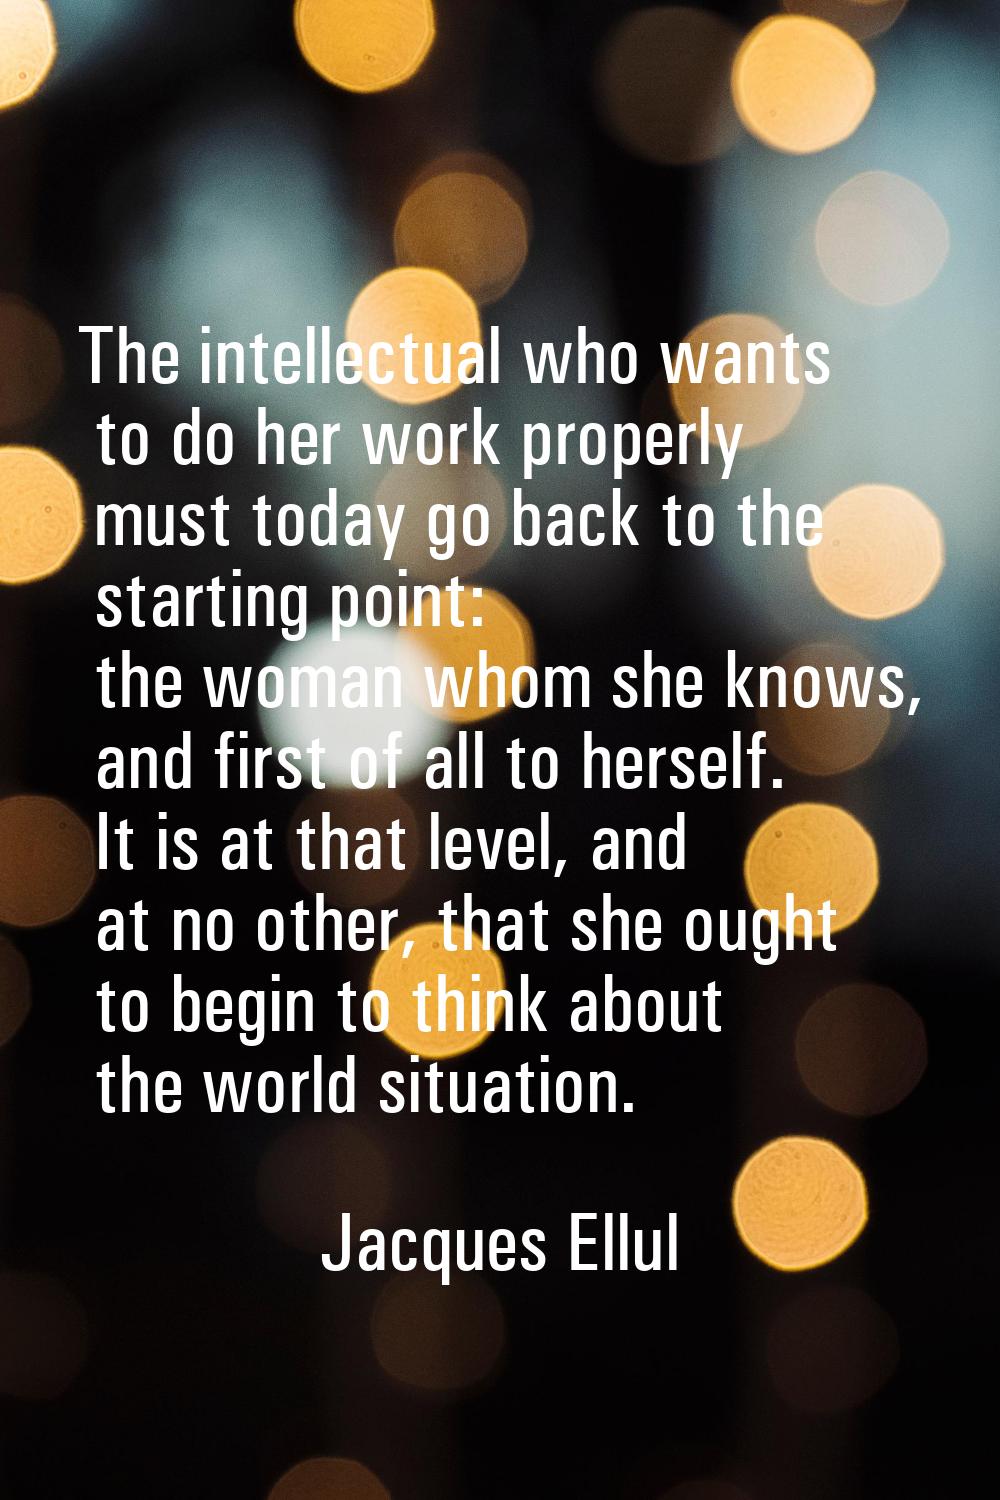 The intellectual who wants to do her work properly must today go back to the starting point: the wo